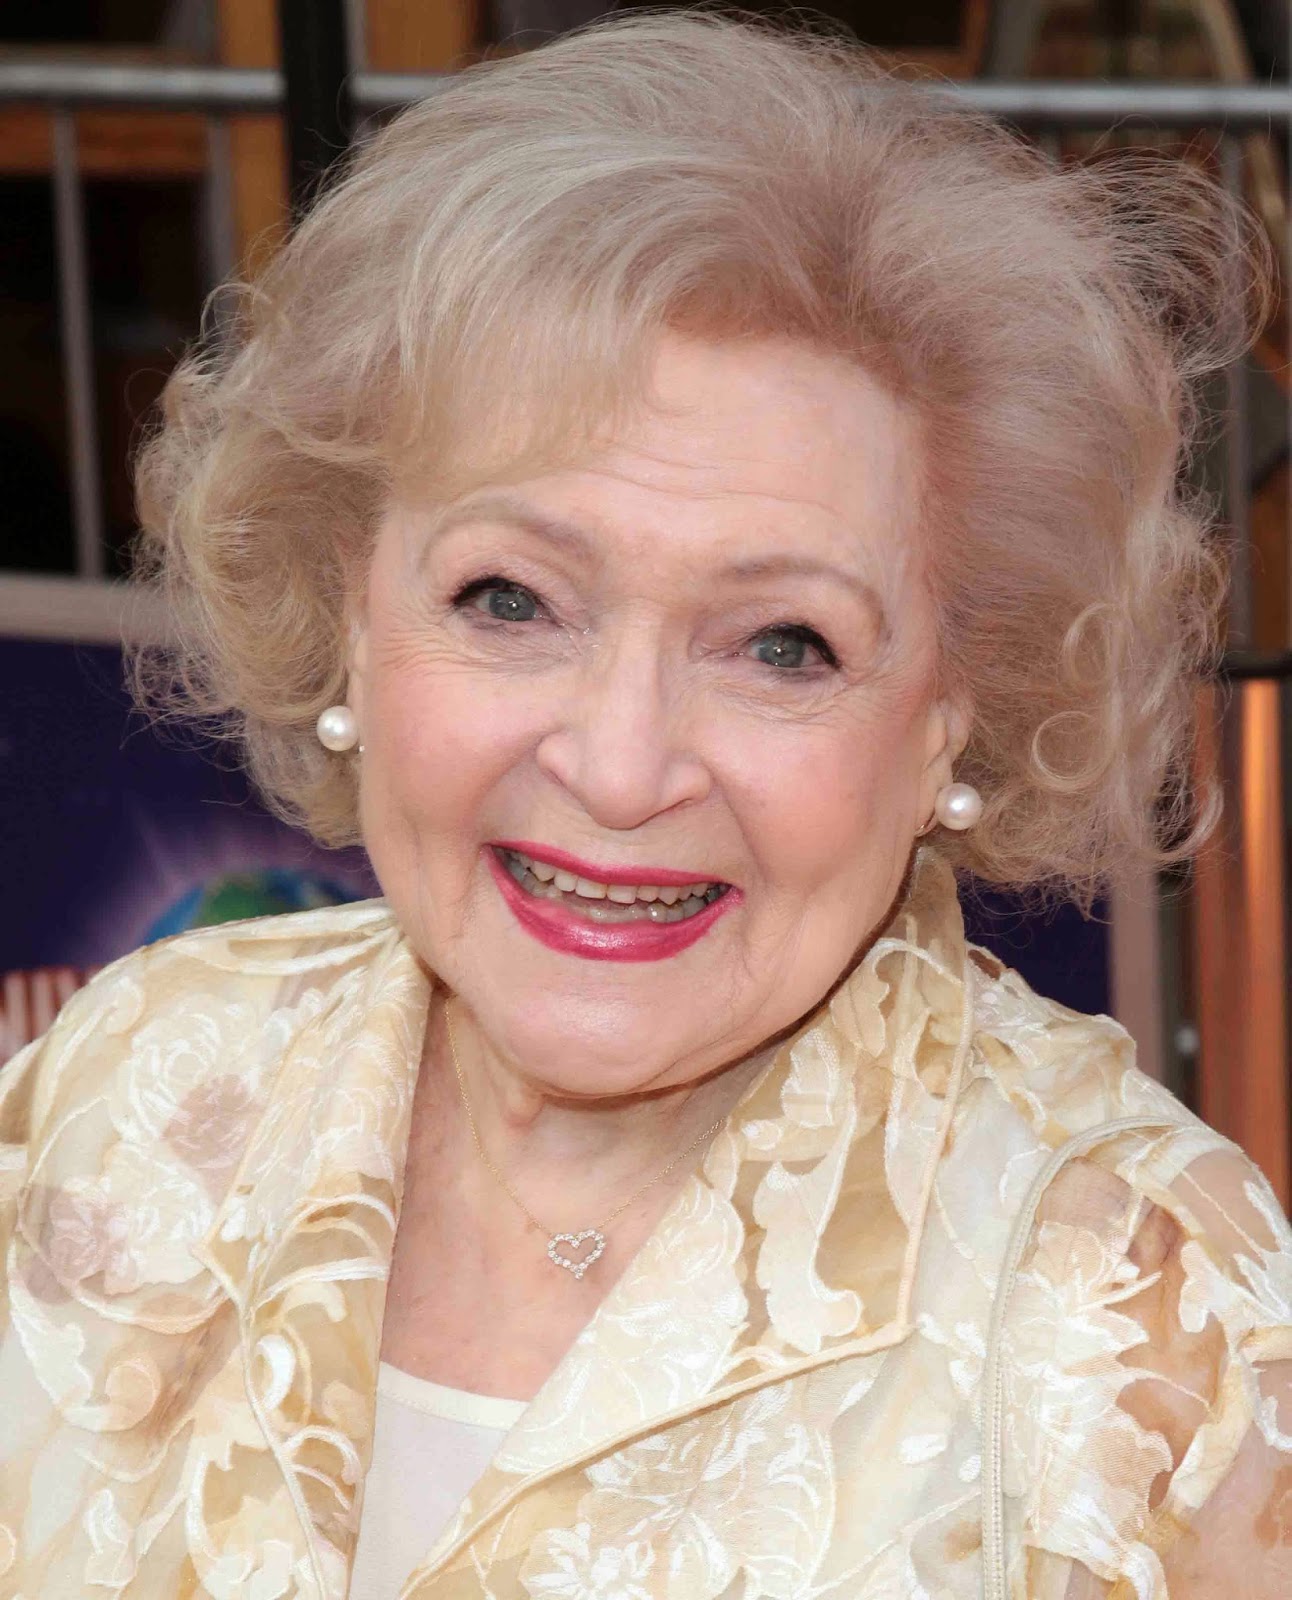 BETTY WHITE IS NOT DEAD AND IS HAVING A BALL